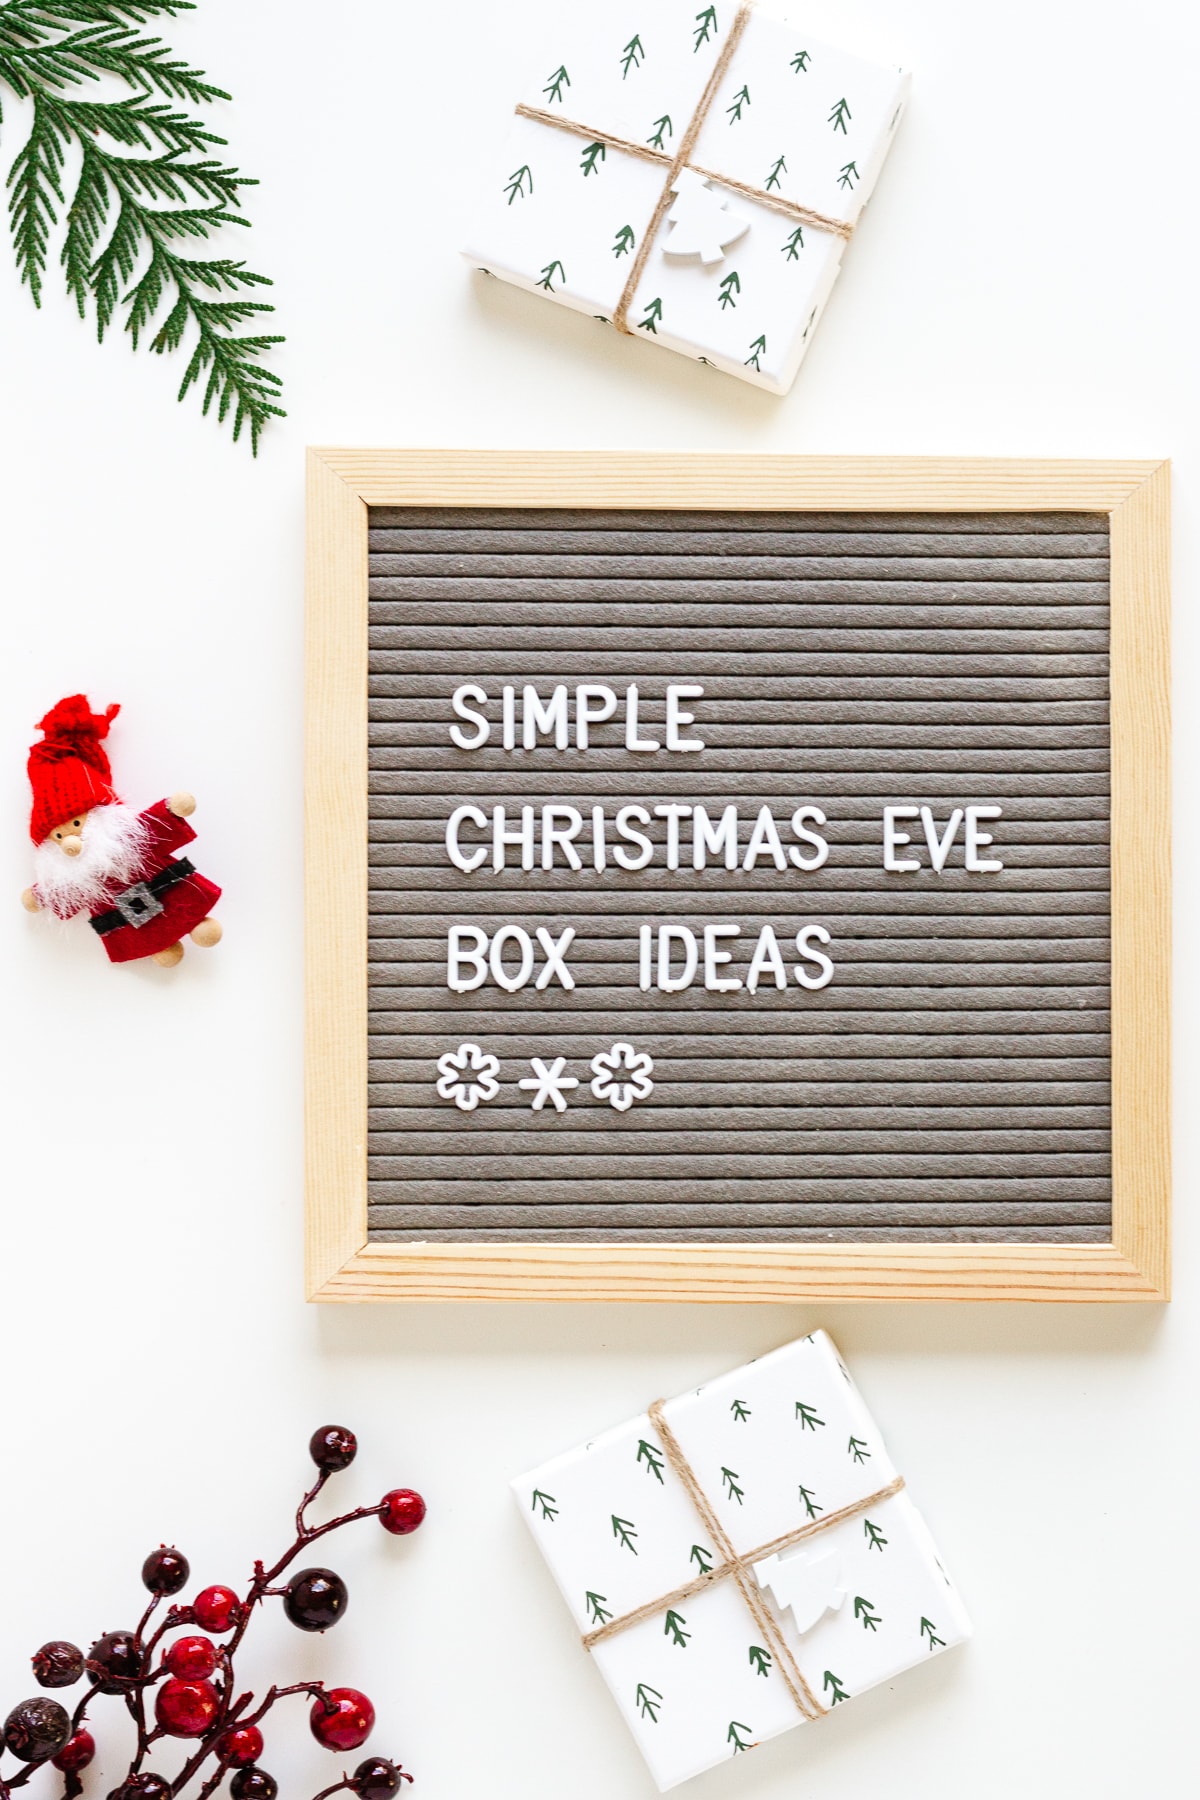 Flatlay photo of a letterboard that says "Simple Christmas Eve Box Ideas" surrounded by some gifts and christmas decor items.